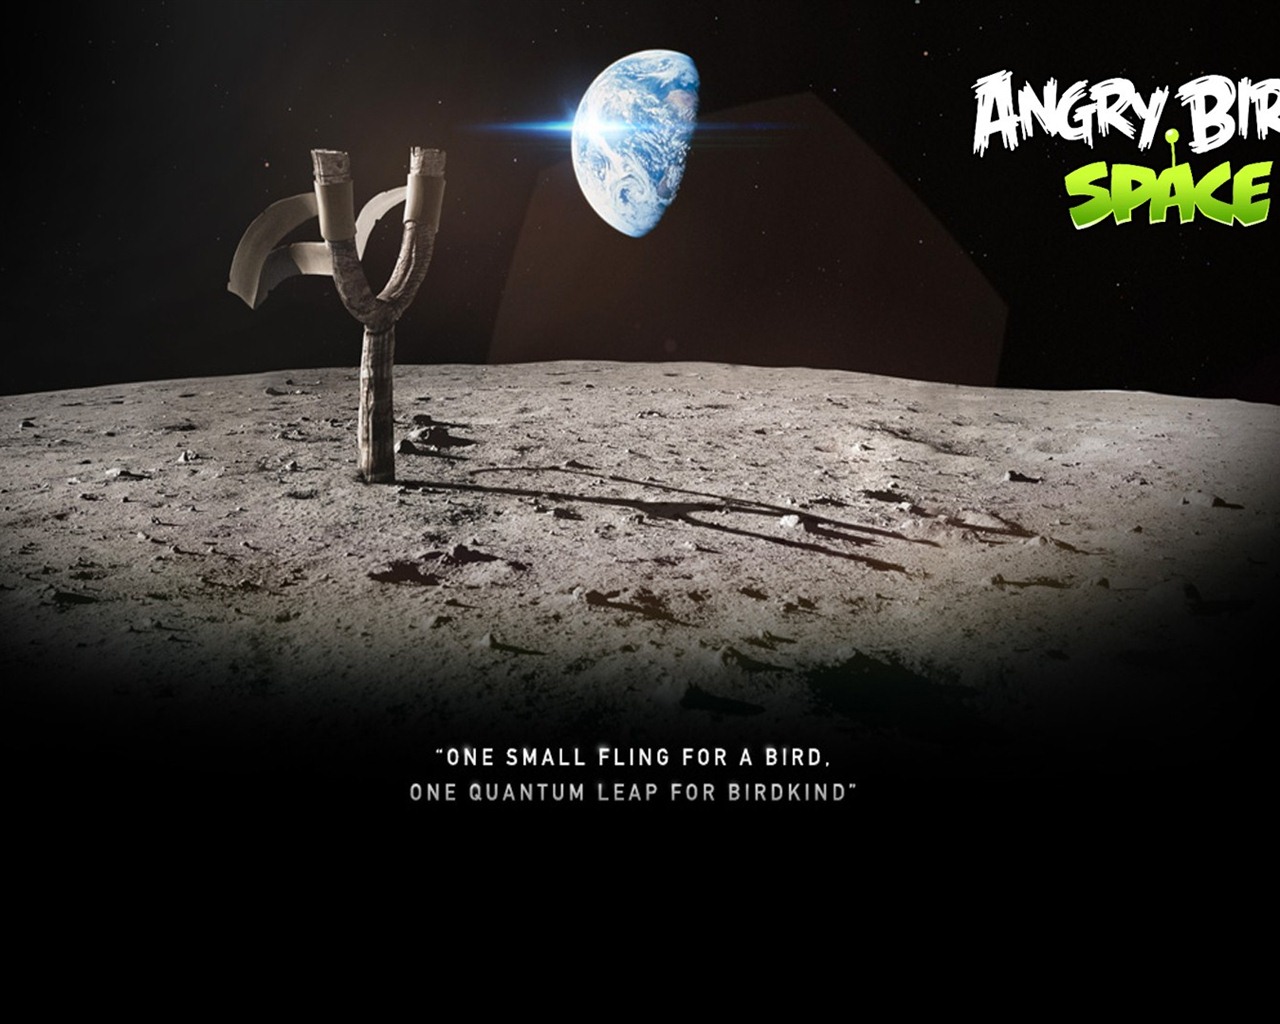 Angry Birds Spiel wallpapers #23 - 1280x1024